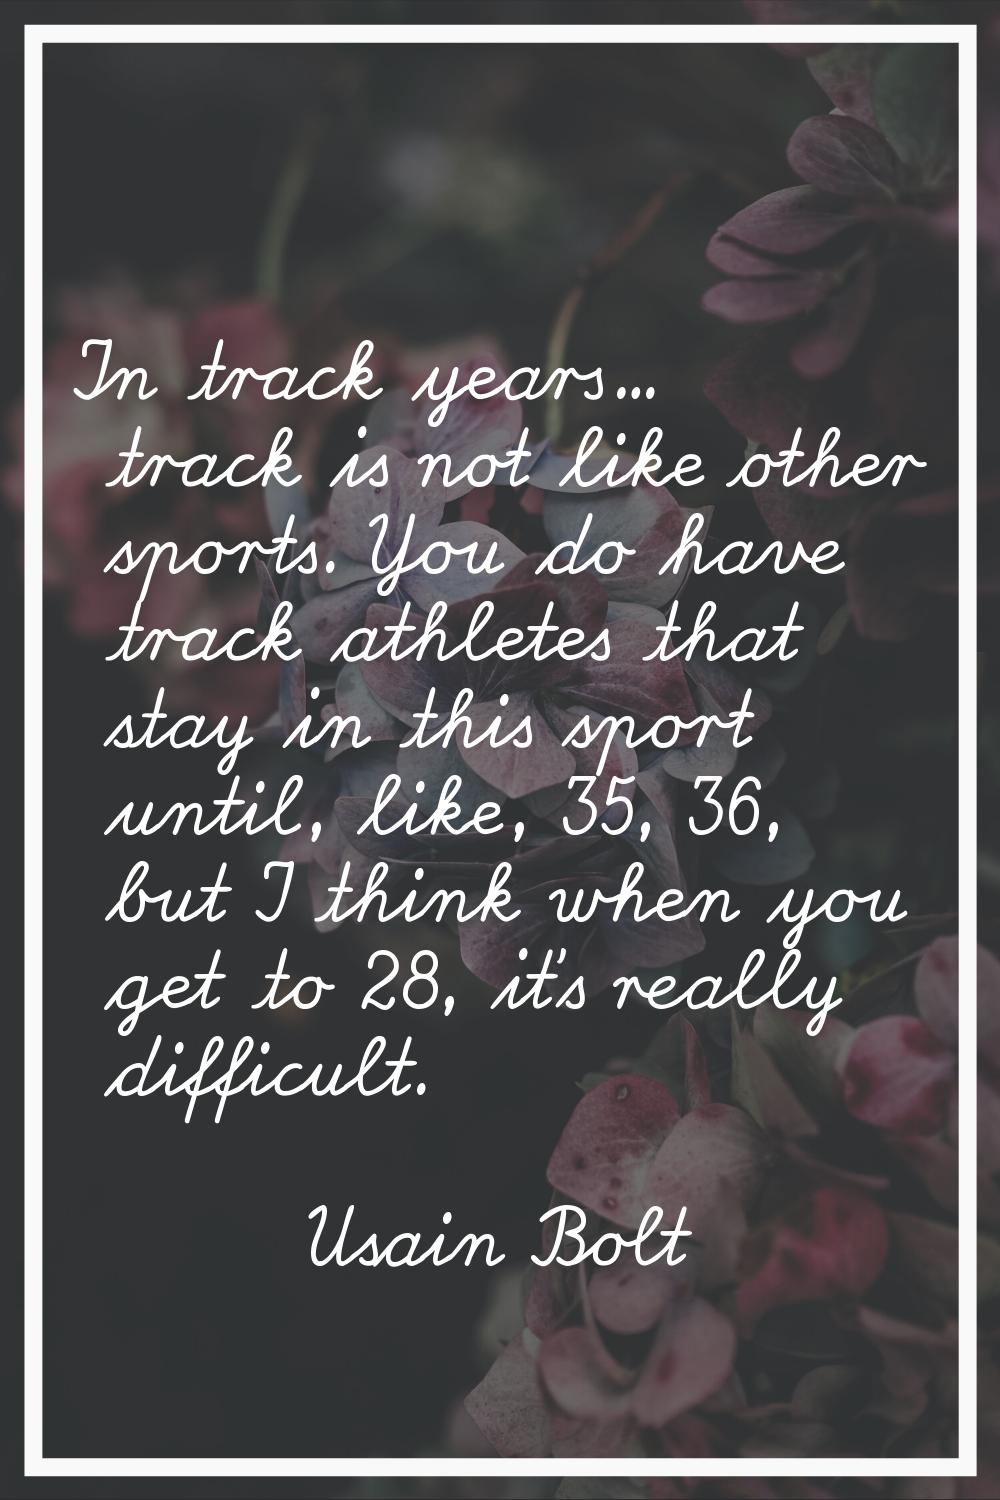 In track years... track is not like other sports. You do have track athletes that stay in this spor